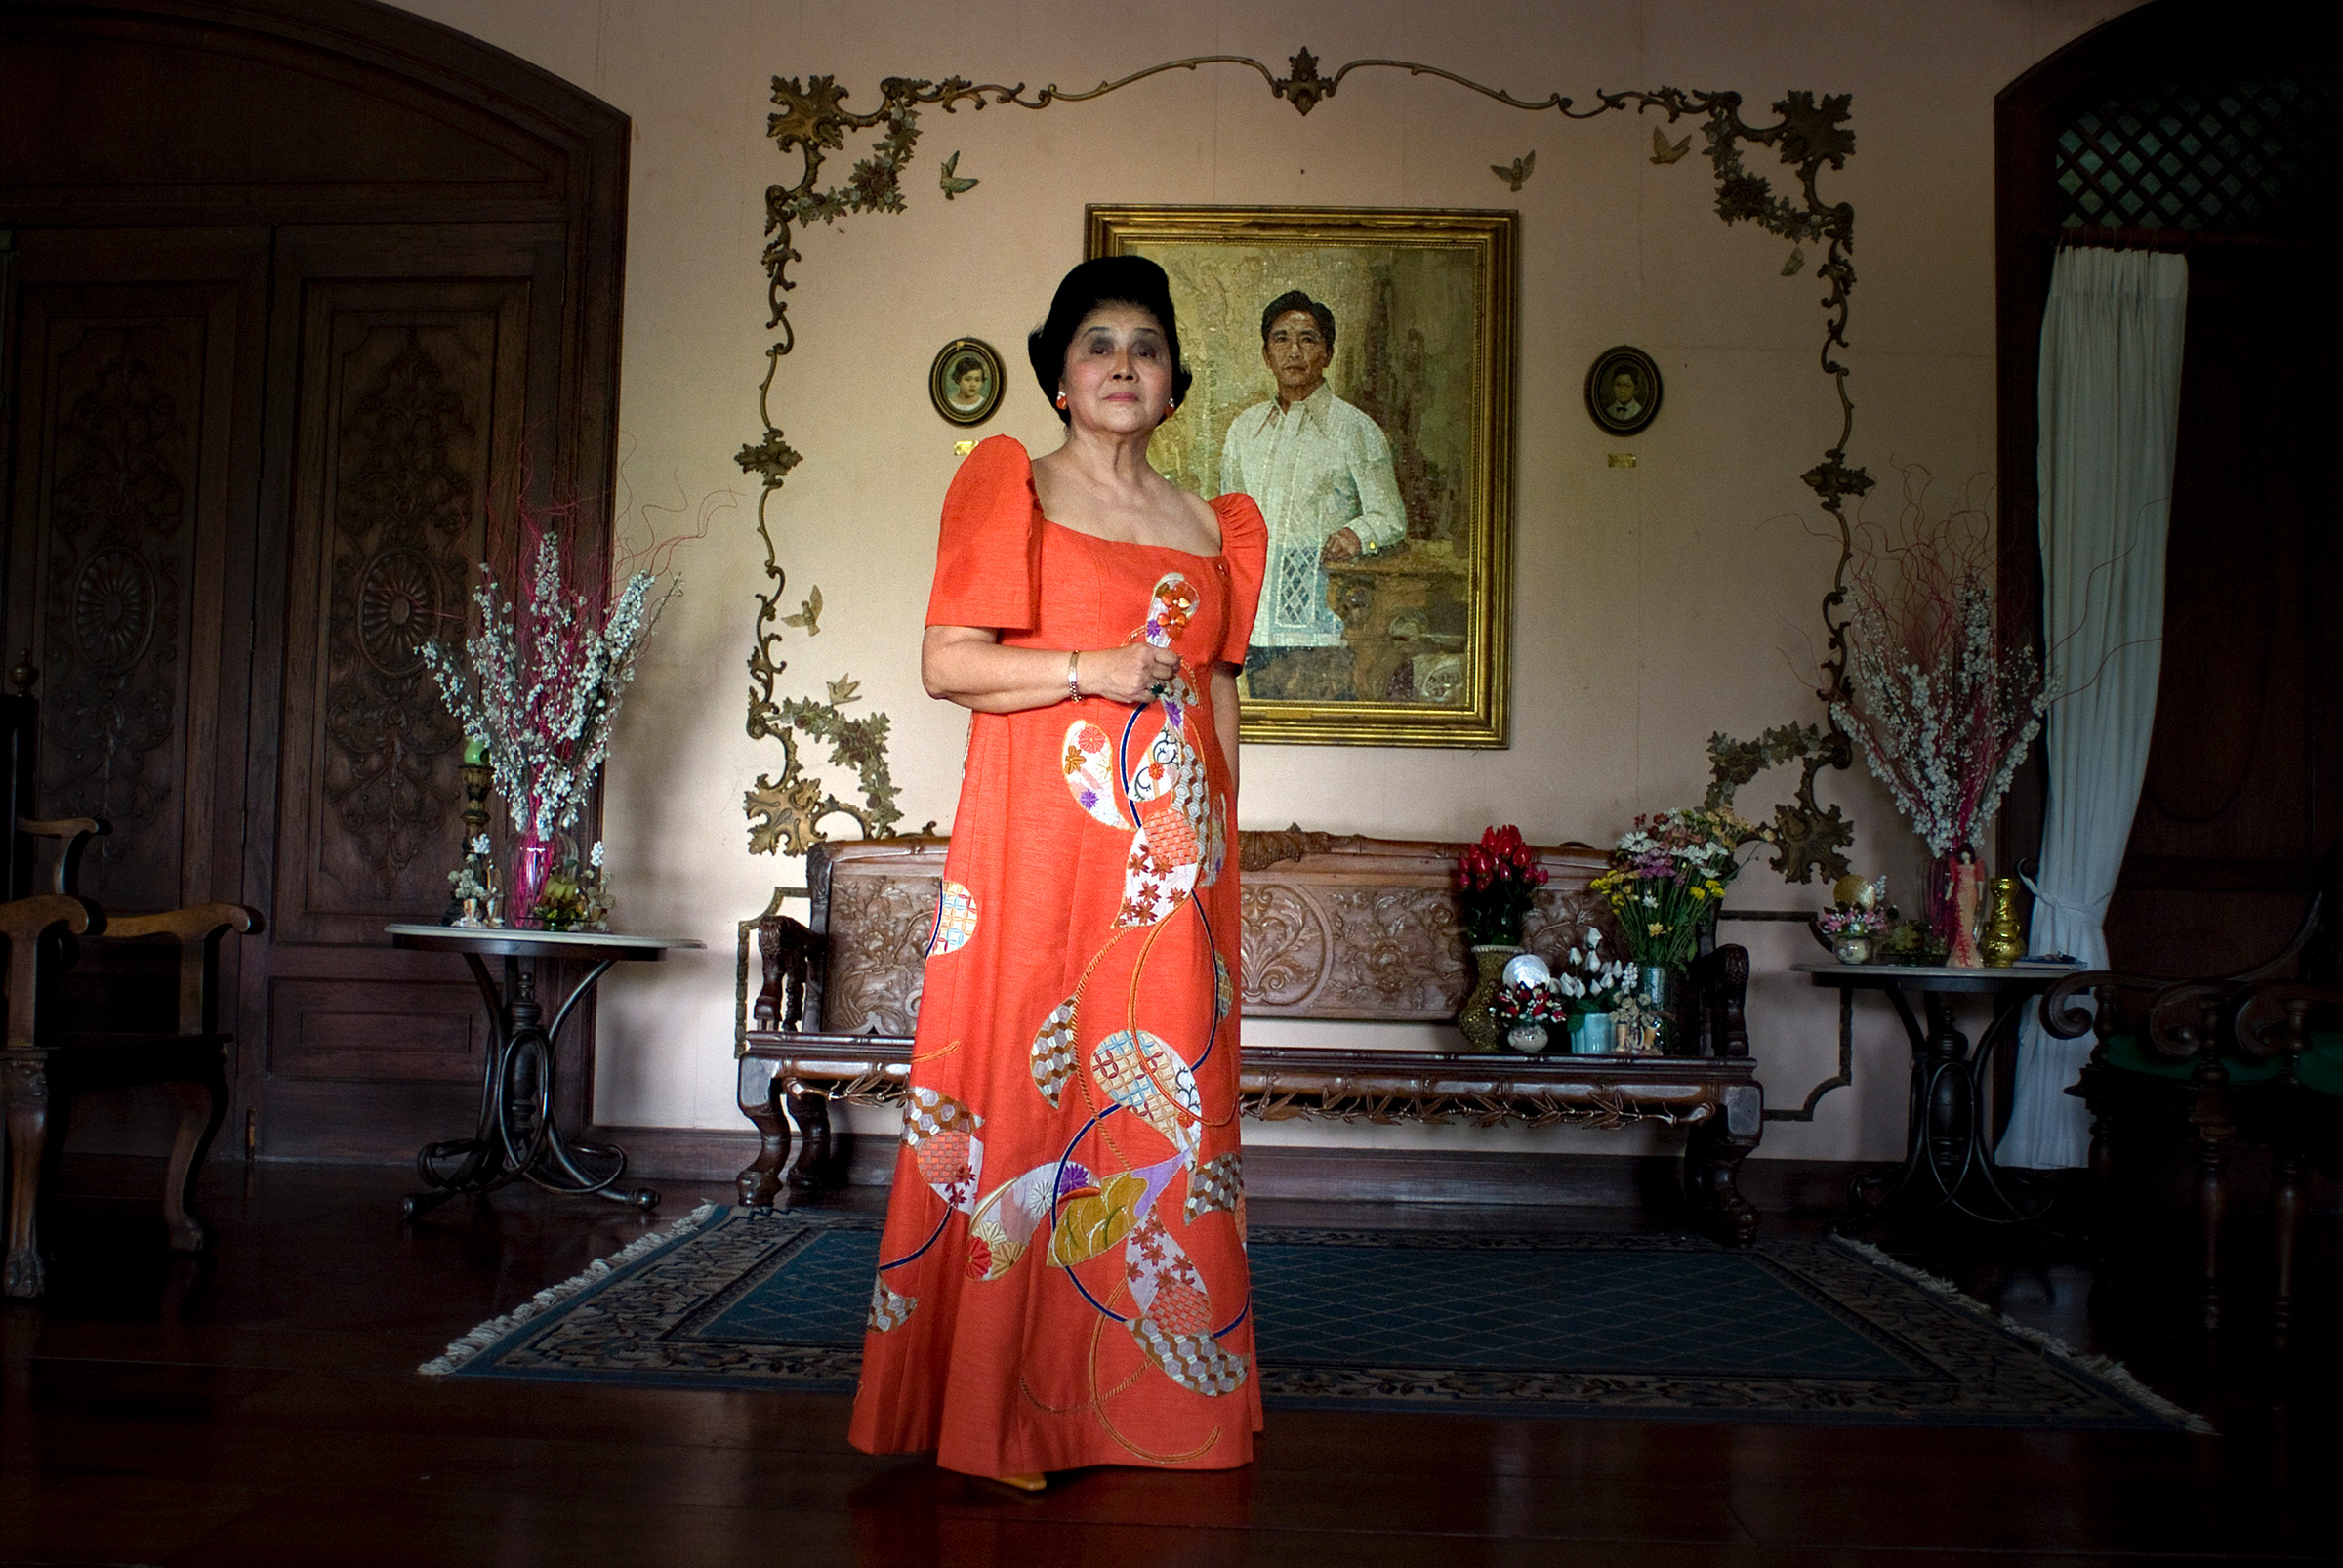 Imelda Marcos poses for a portrait in front of a painting of her late husband and former Philippines President Ferdinand Marcos, inside her home in Batac, Ilocos Norte, Philippines, in April 2010. (Jes Aznar—The New York Times/Redux)